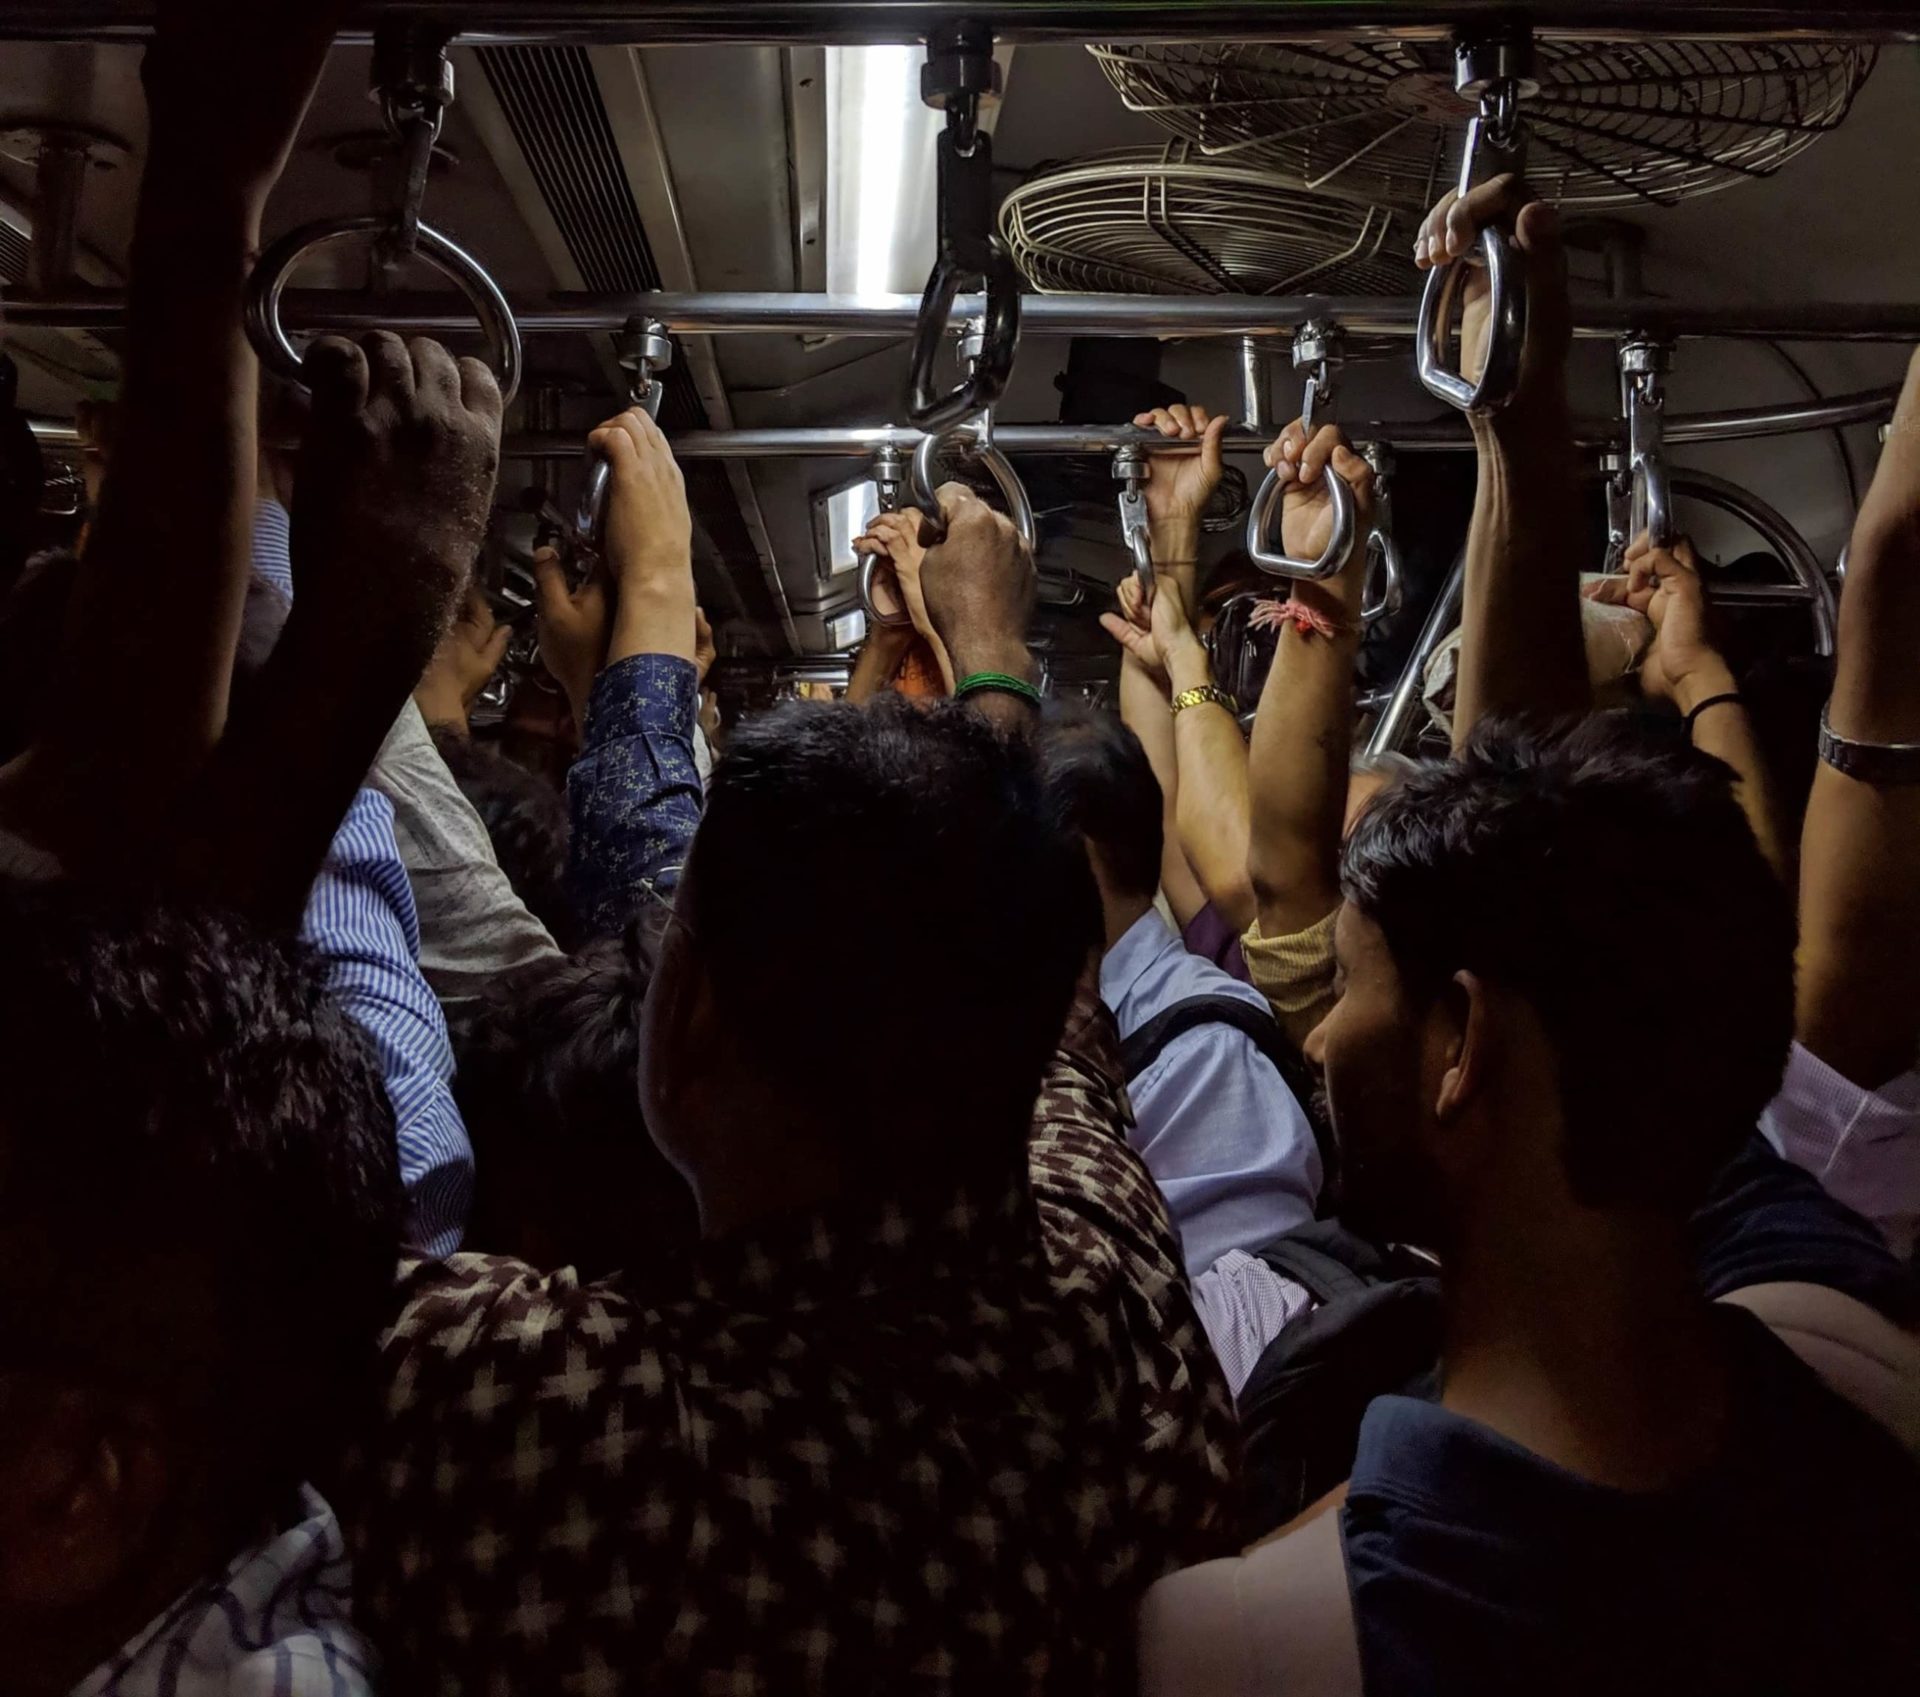 Public Transit – an element of economic and environmental justice